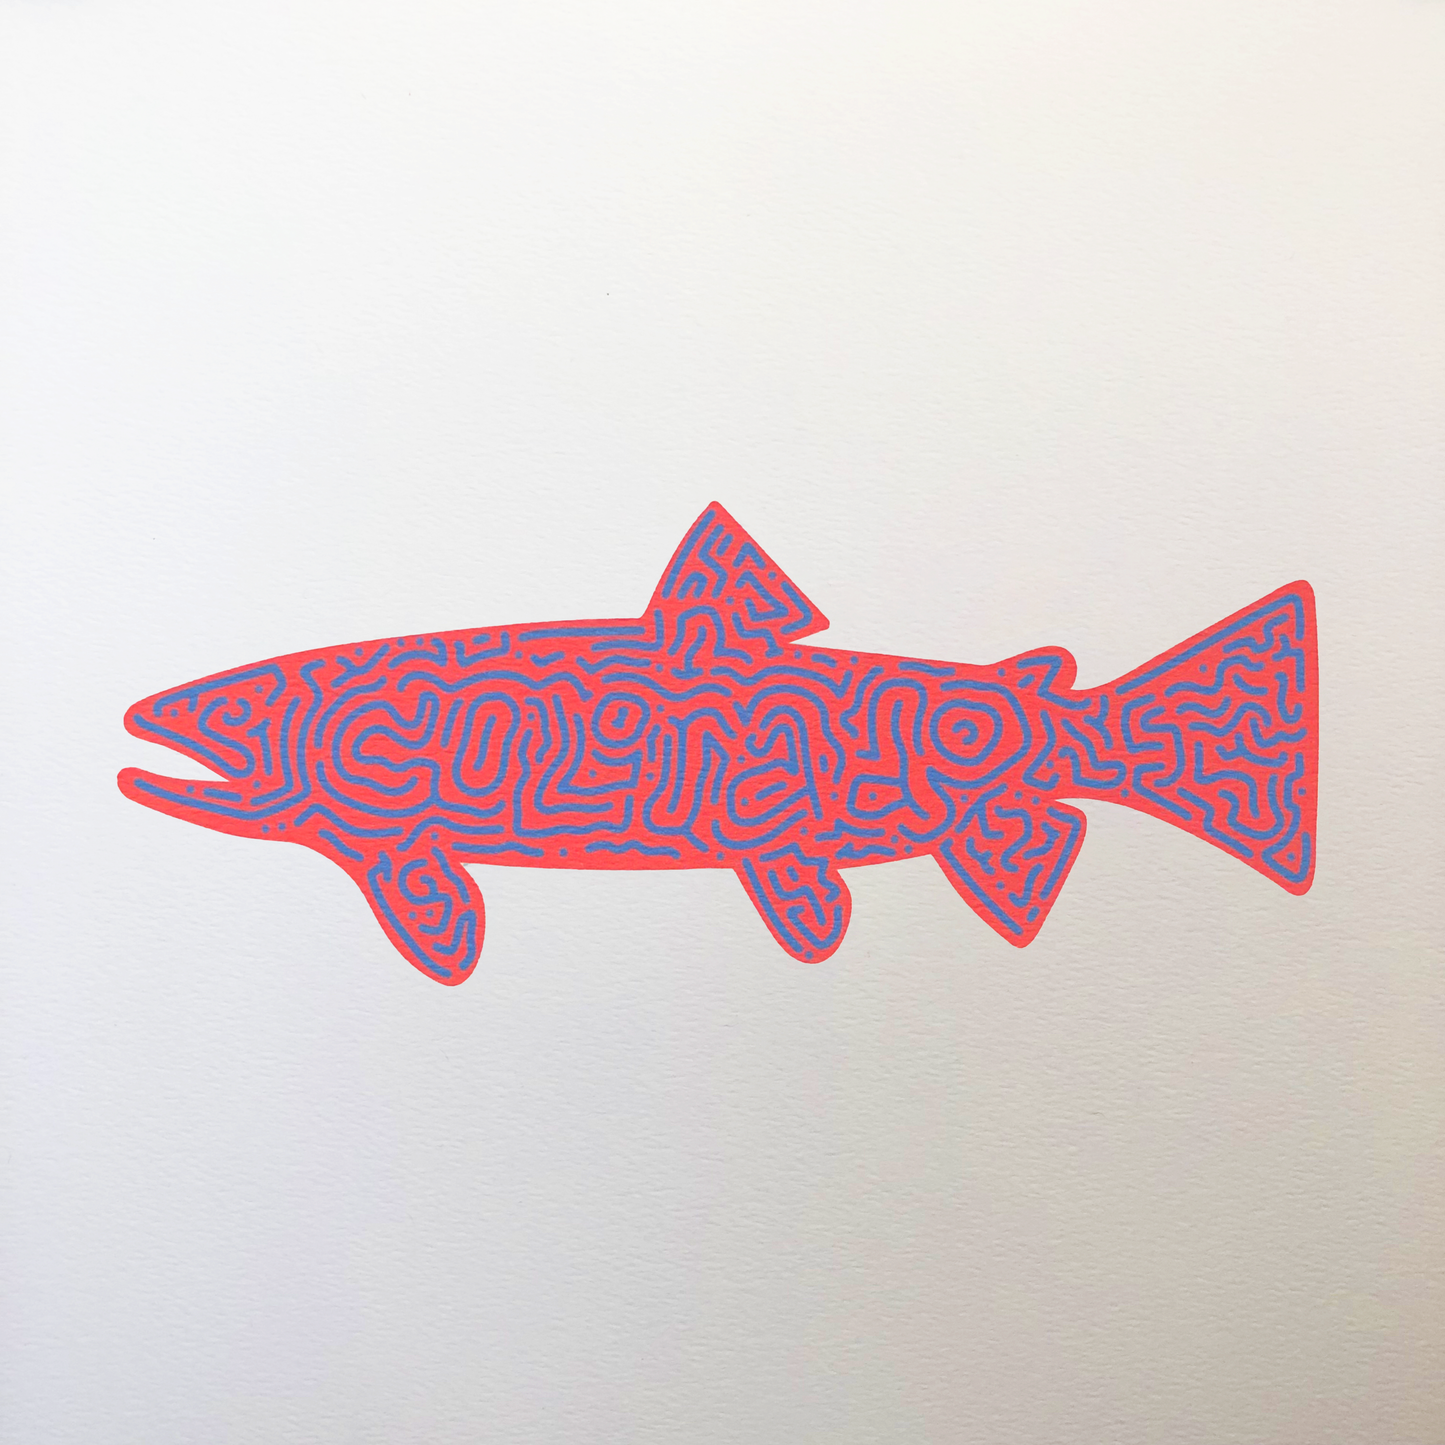 Thunderbird Design StudioTrippy Tiger - Colorado Art PrintTrippy Tiger - Colorado Art PrintPrint
This series is inspired by the vermiculations on tiger and brook trout. These high quality art prints pay tribute to the state where these beautiful fish are found.